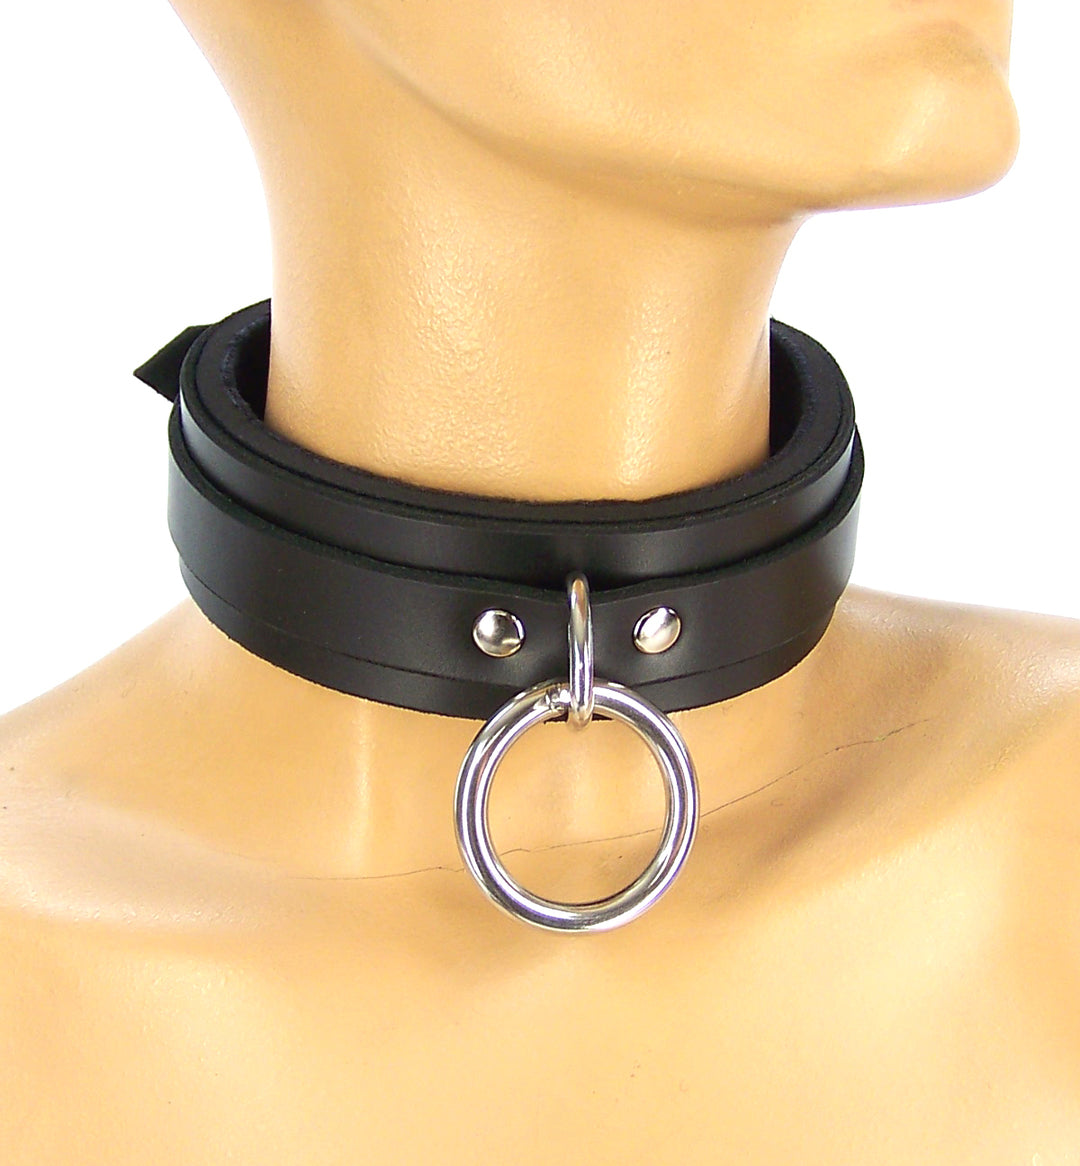 The front view of the Leather Neoprene-lined collar.